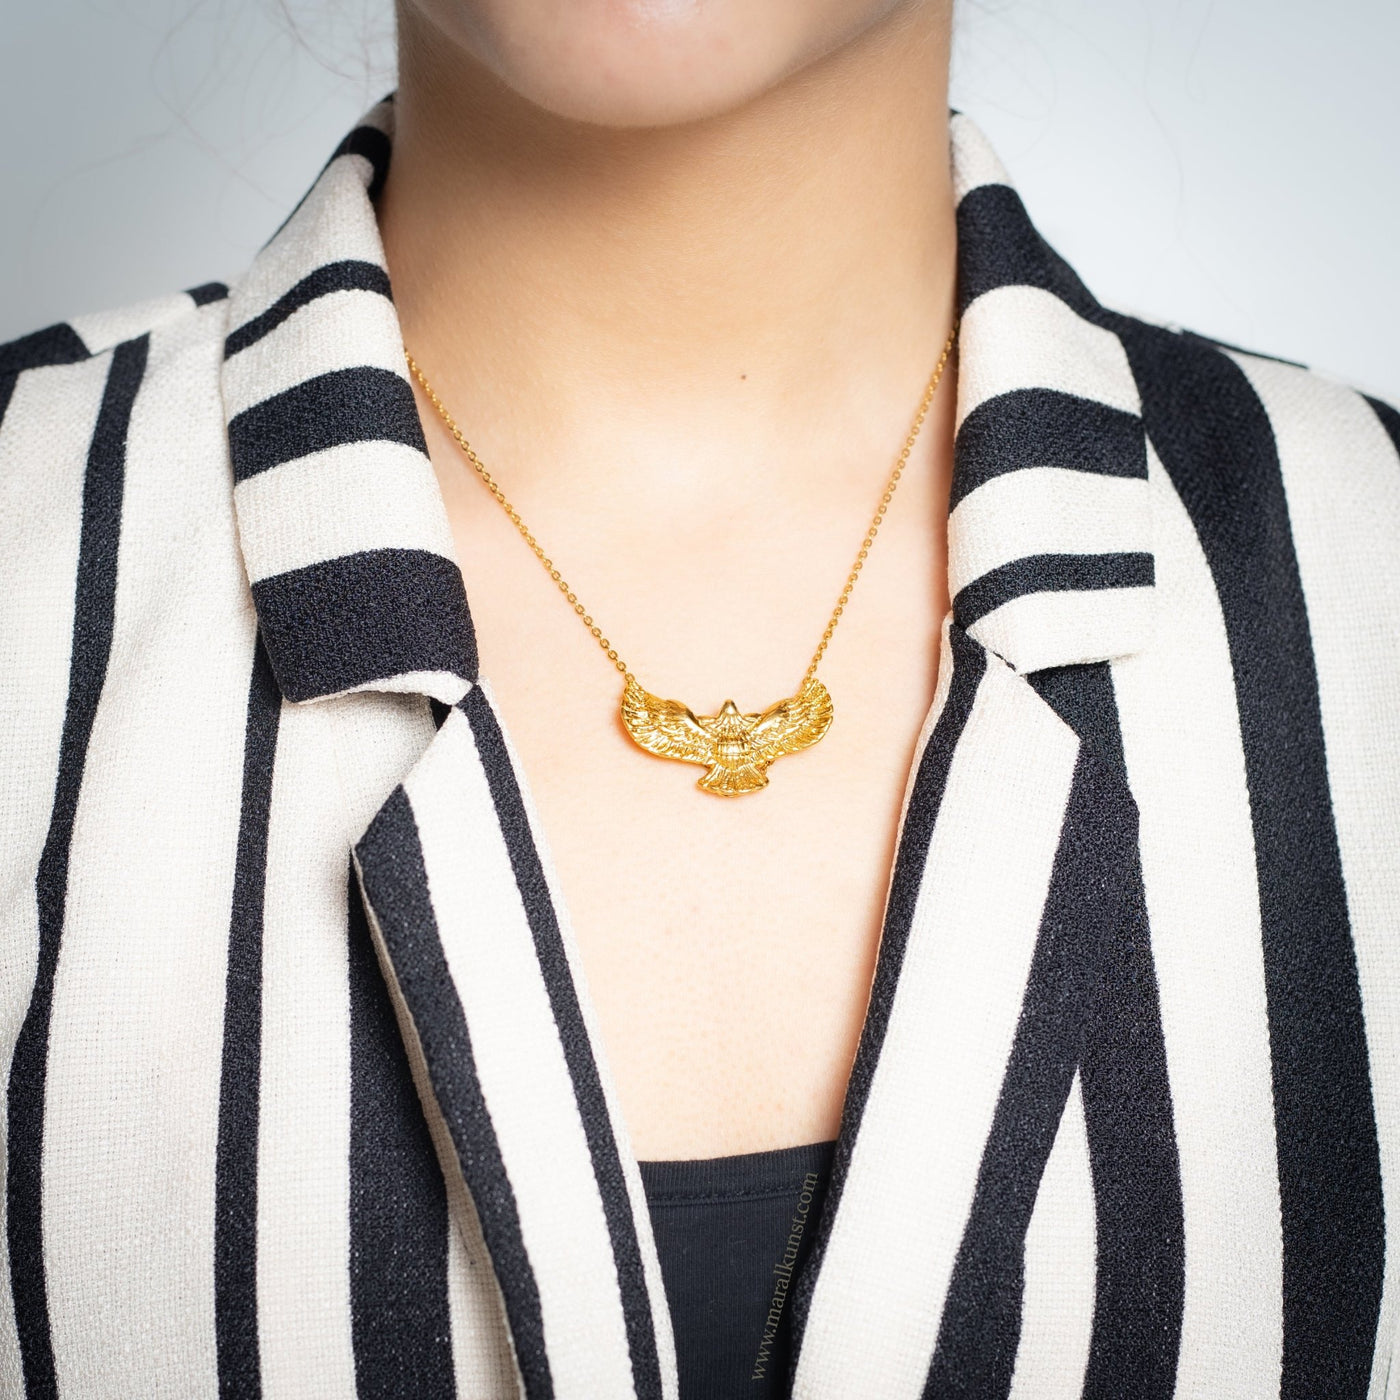 Flying Eagle Necklace - Maral Kunst Jewelry